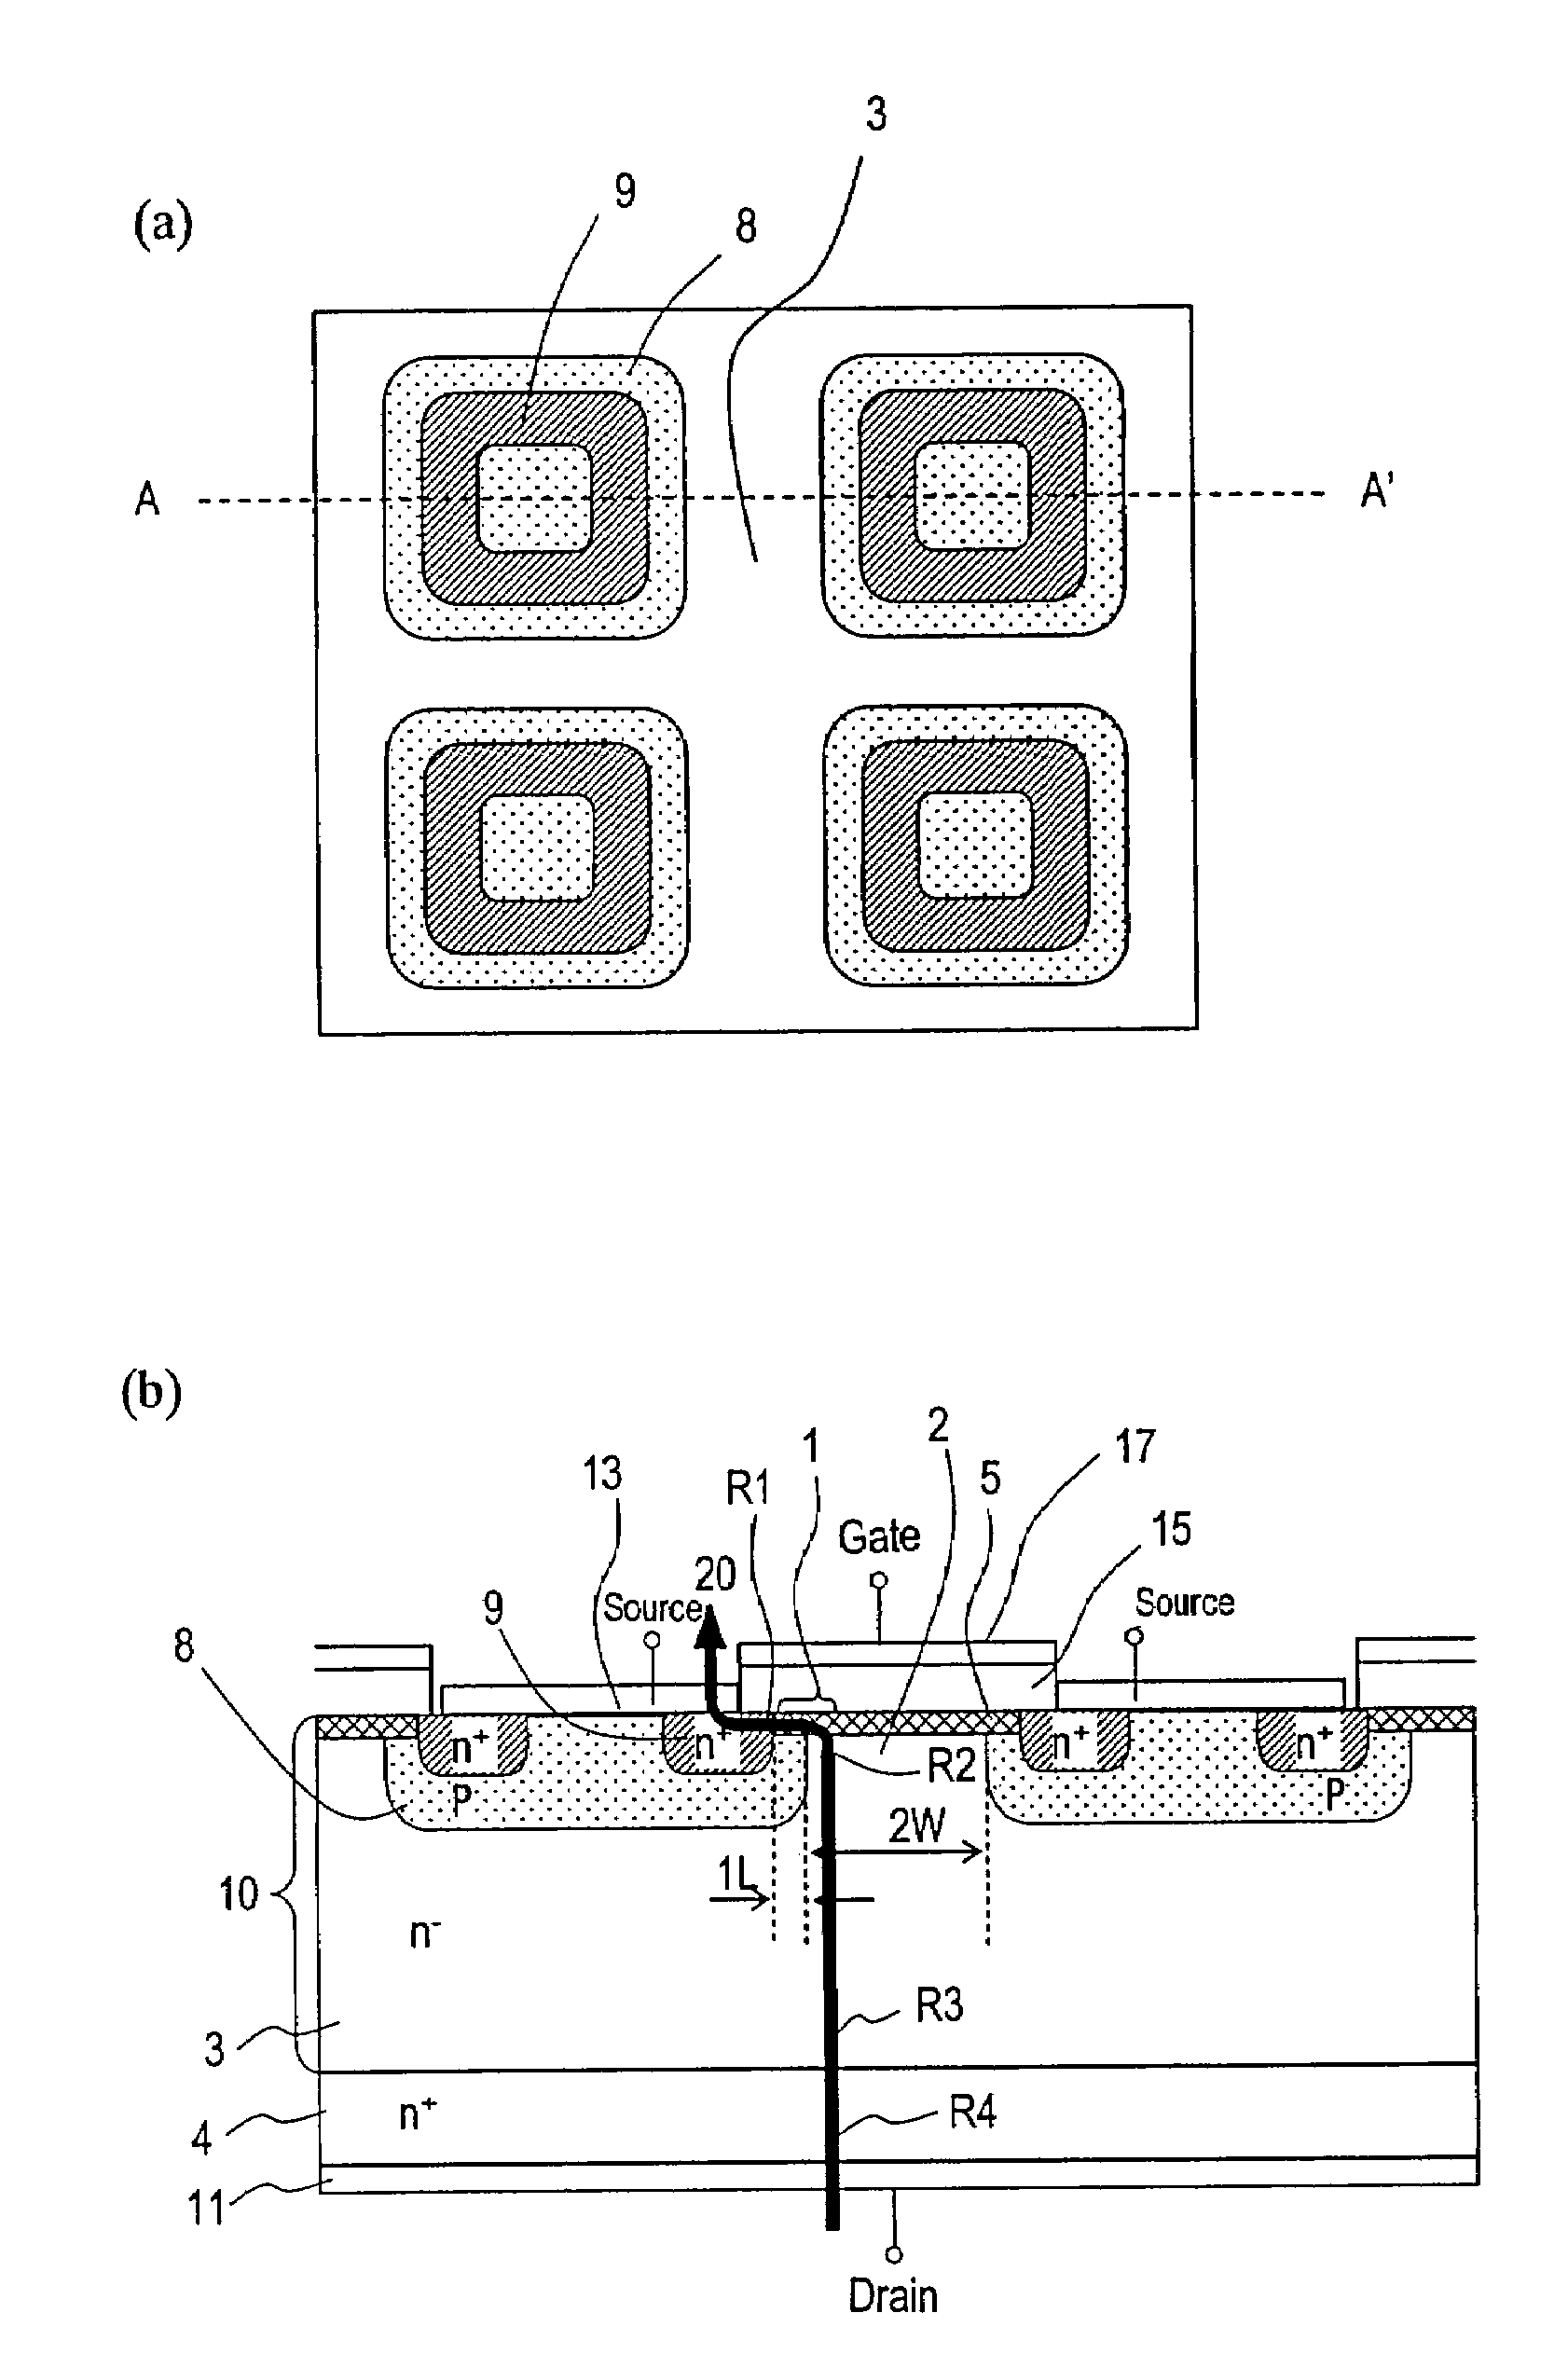 Wide gap semiconductor power device with temperature independent resistivity due to channel region resistivity having negative temperature dependence